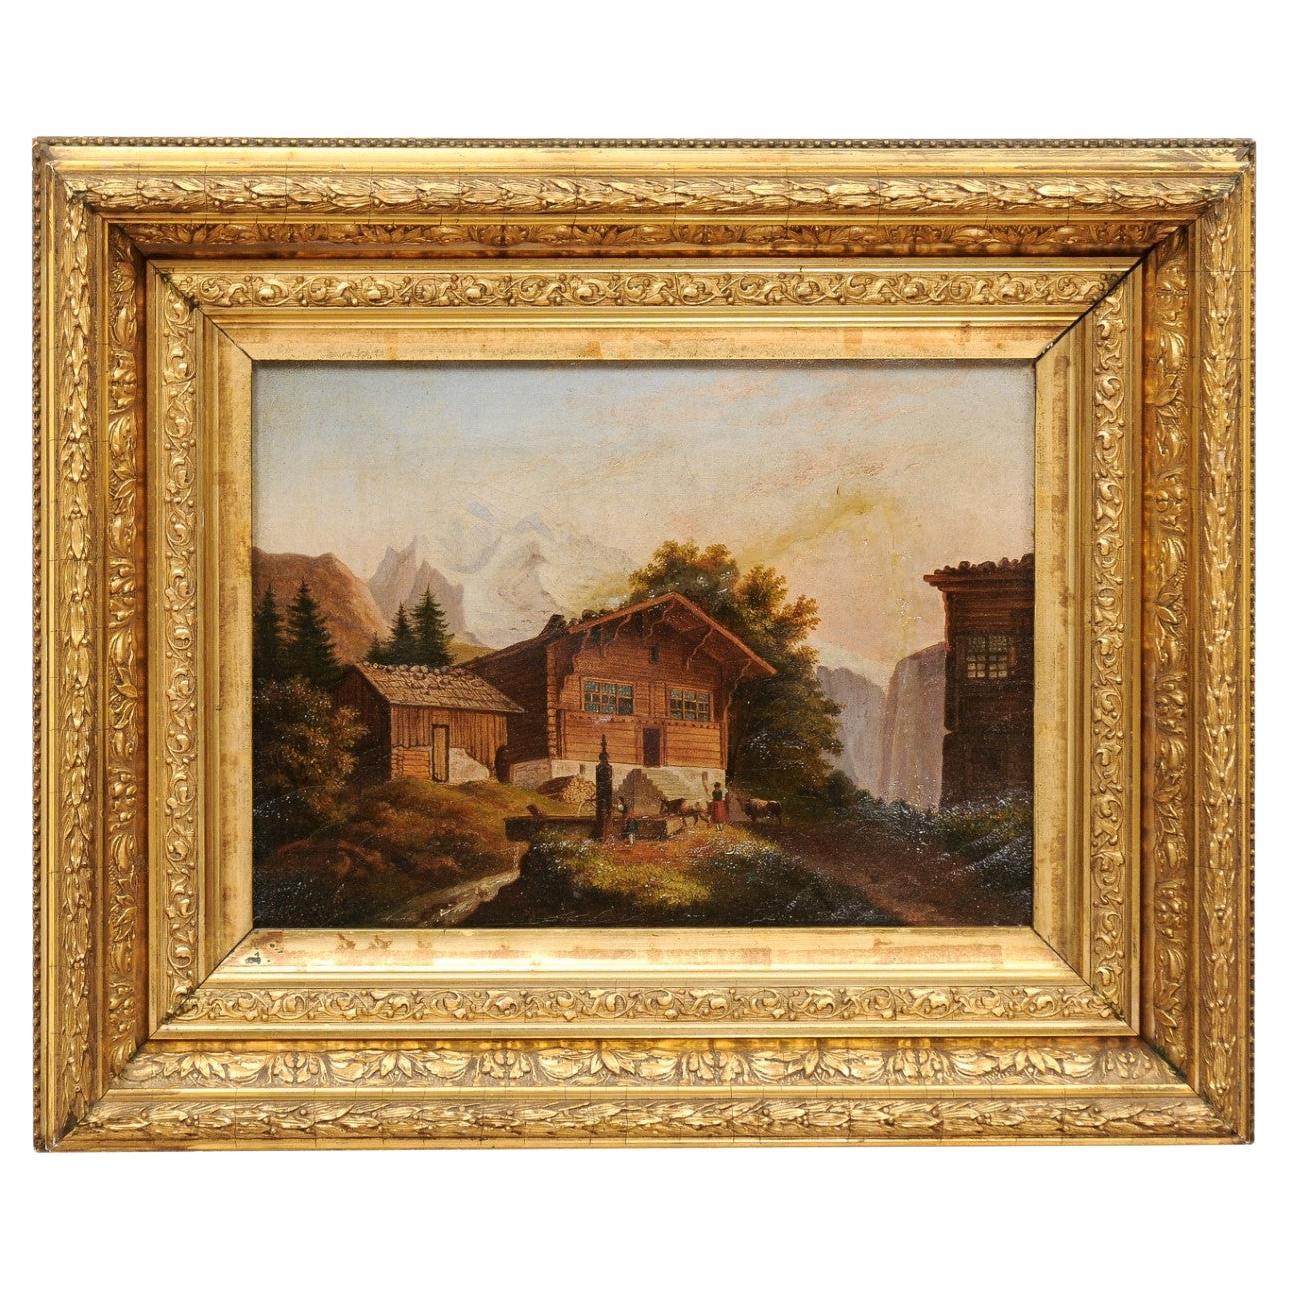  Giltwood Framed Oil on Canvas Painting of Chalet, 19th Century For Sale